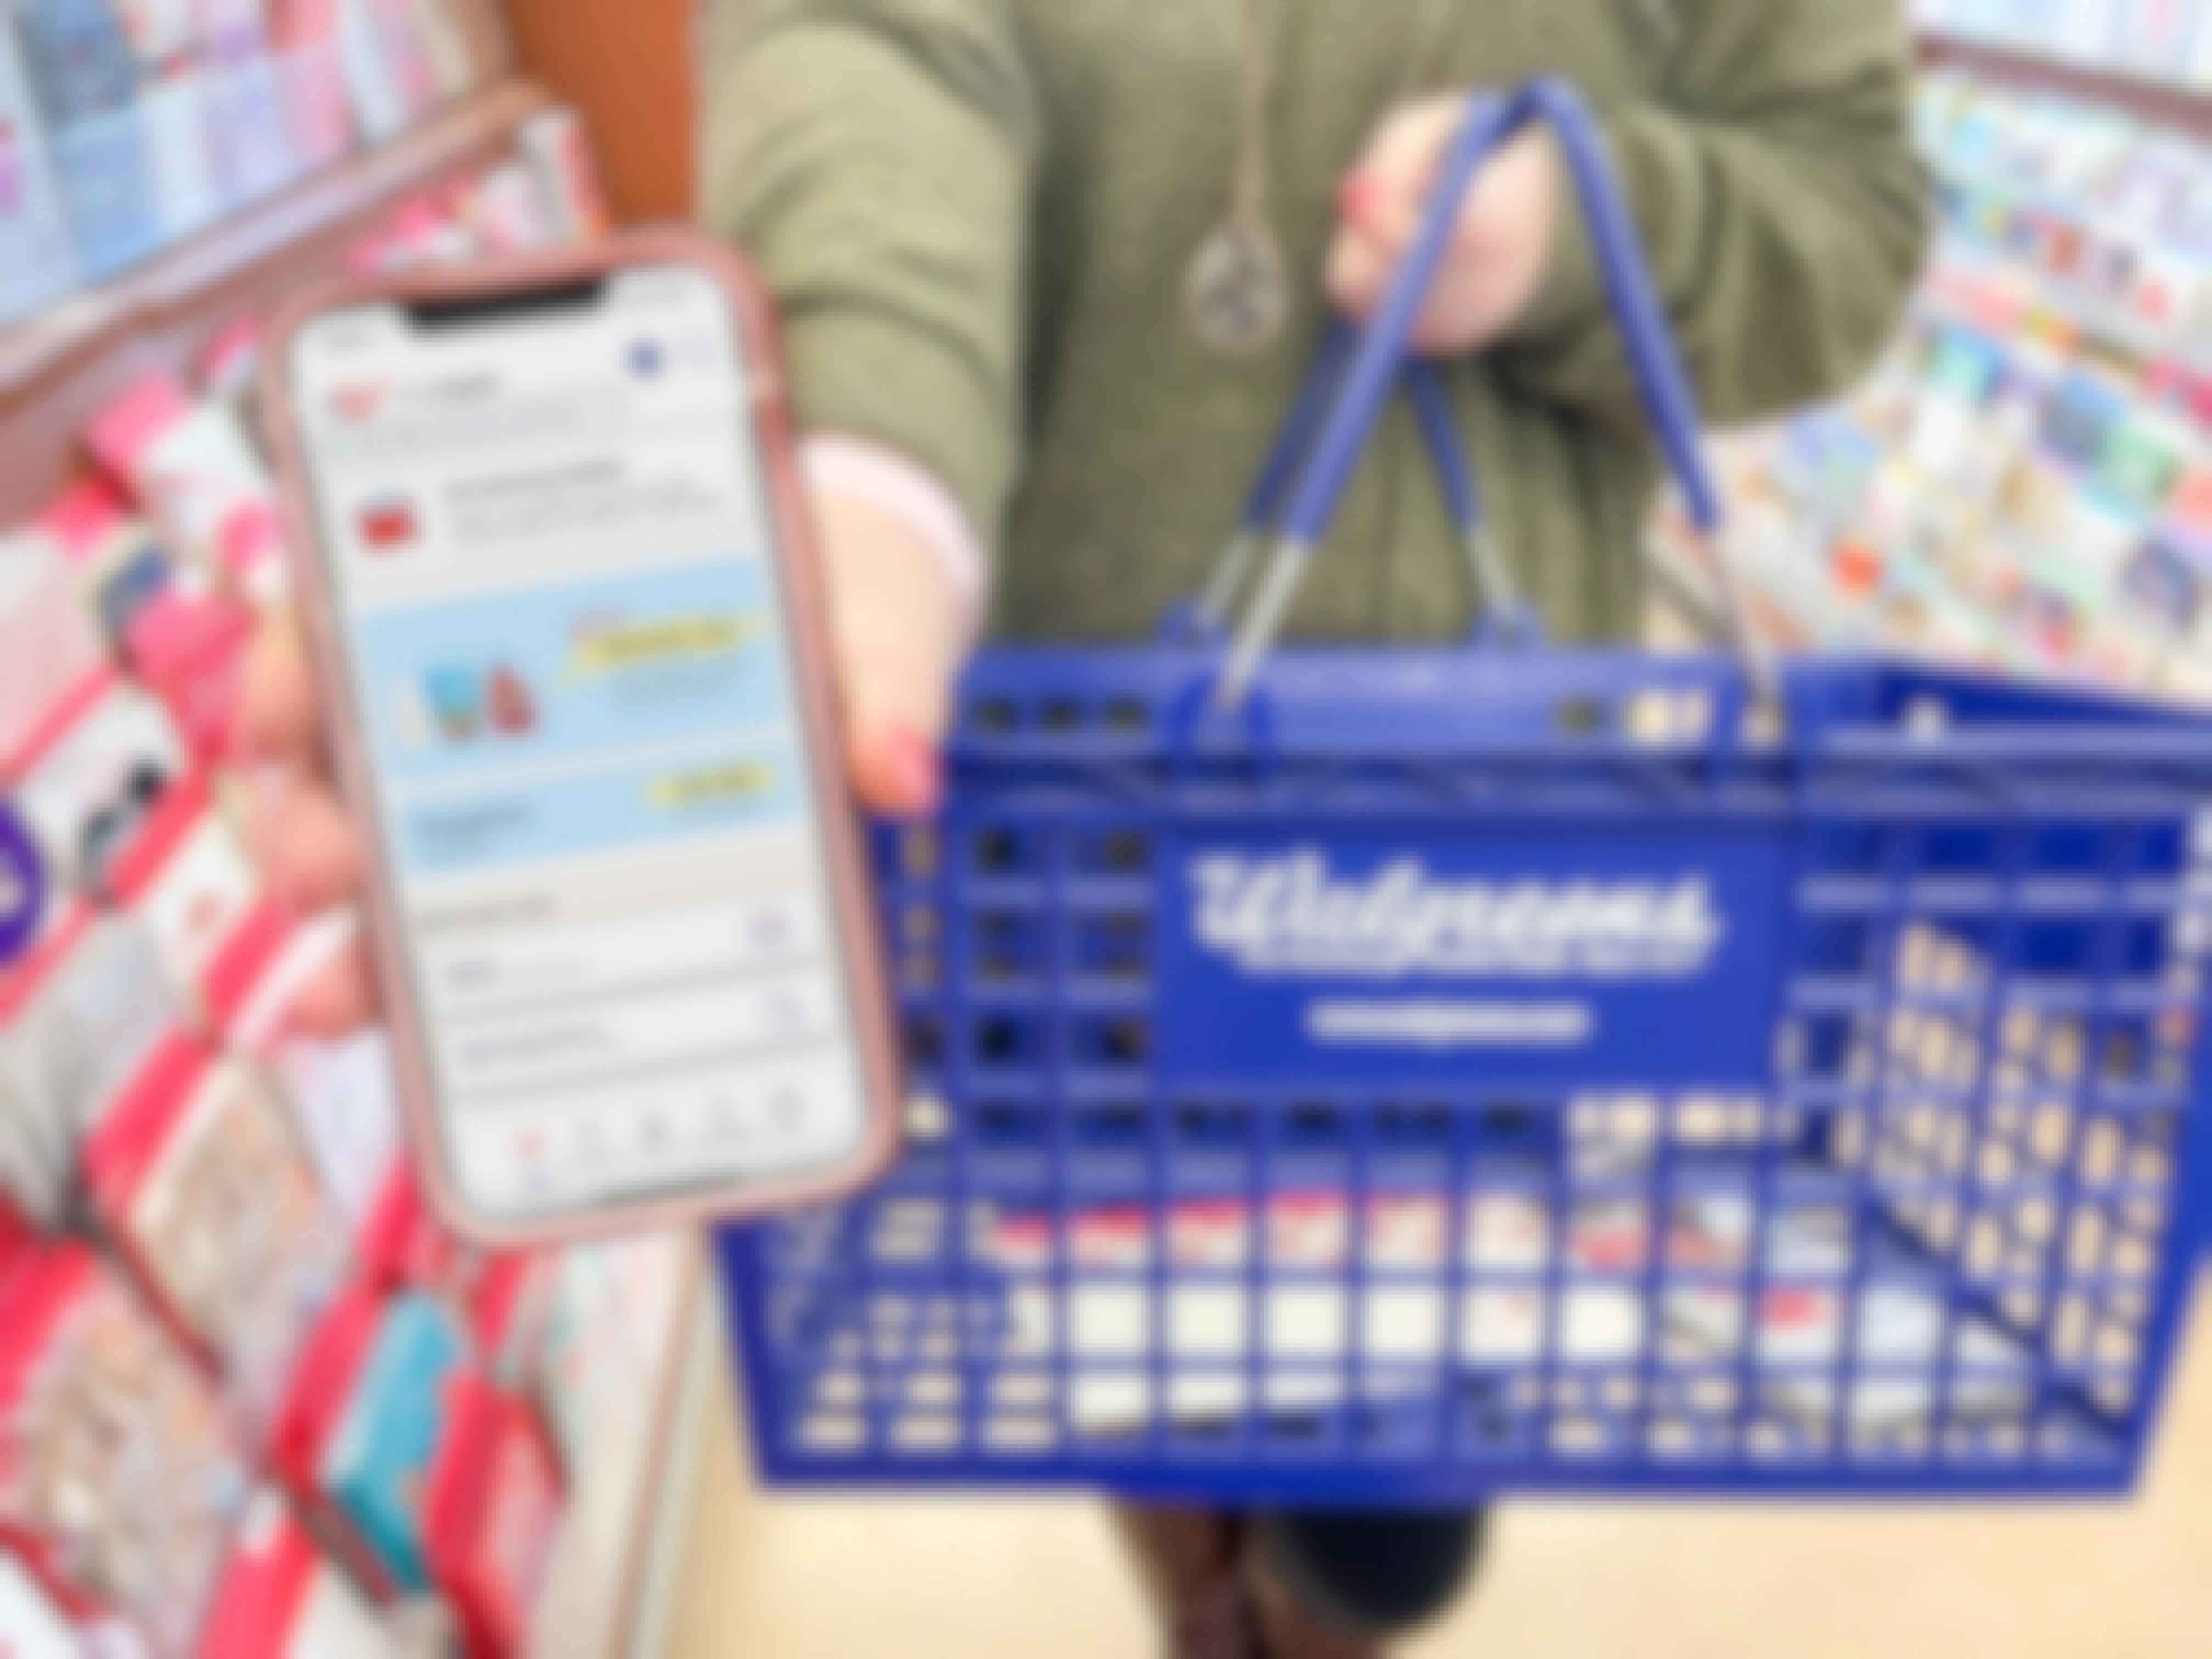 woman holding cellphone with walgreens app while holding walgreens basket